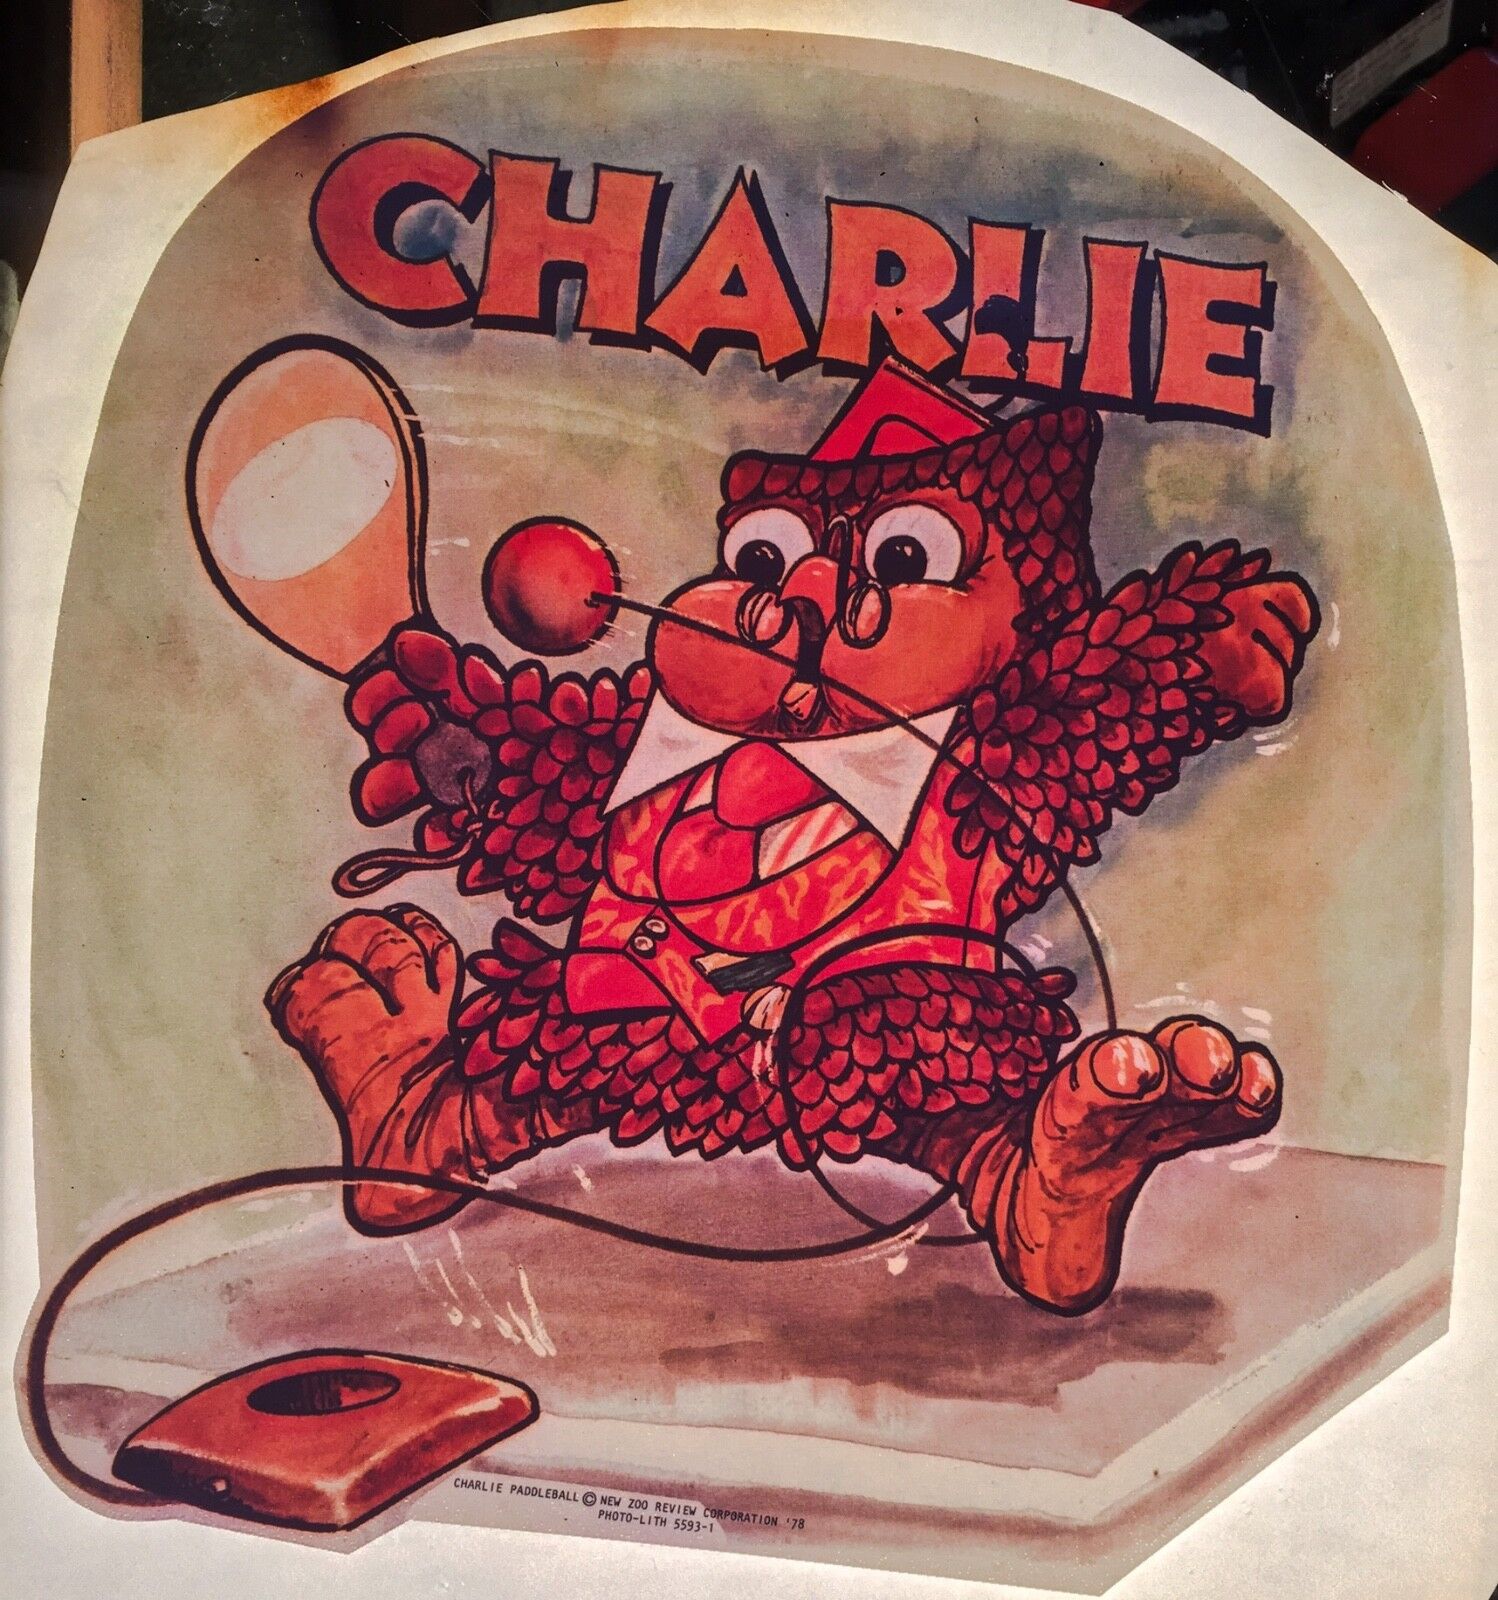 VTG 70’s New Zoo Review Charlie Saturday Morning Cartoon TV Show t-shirt Iron-On